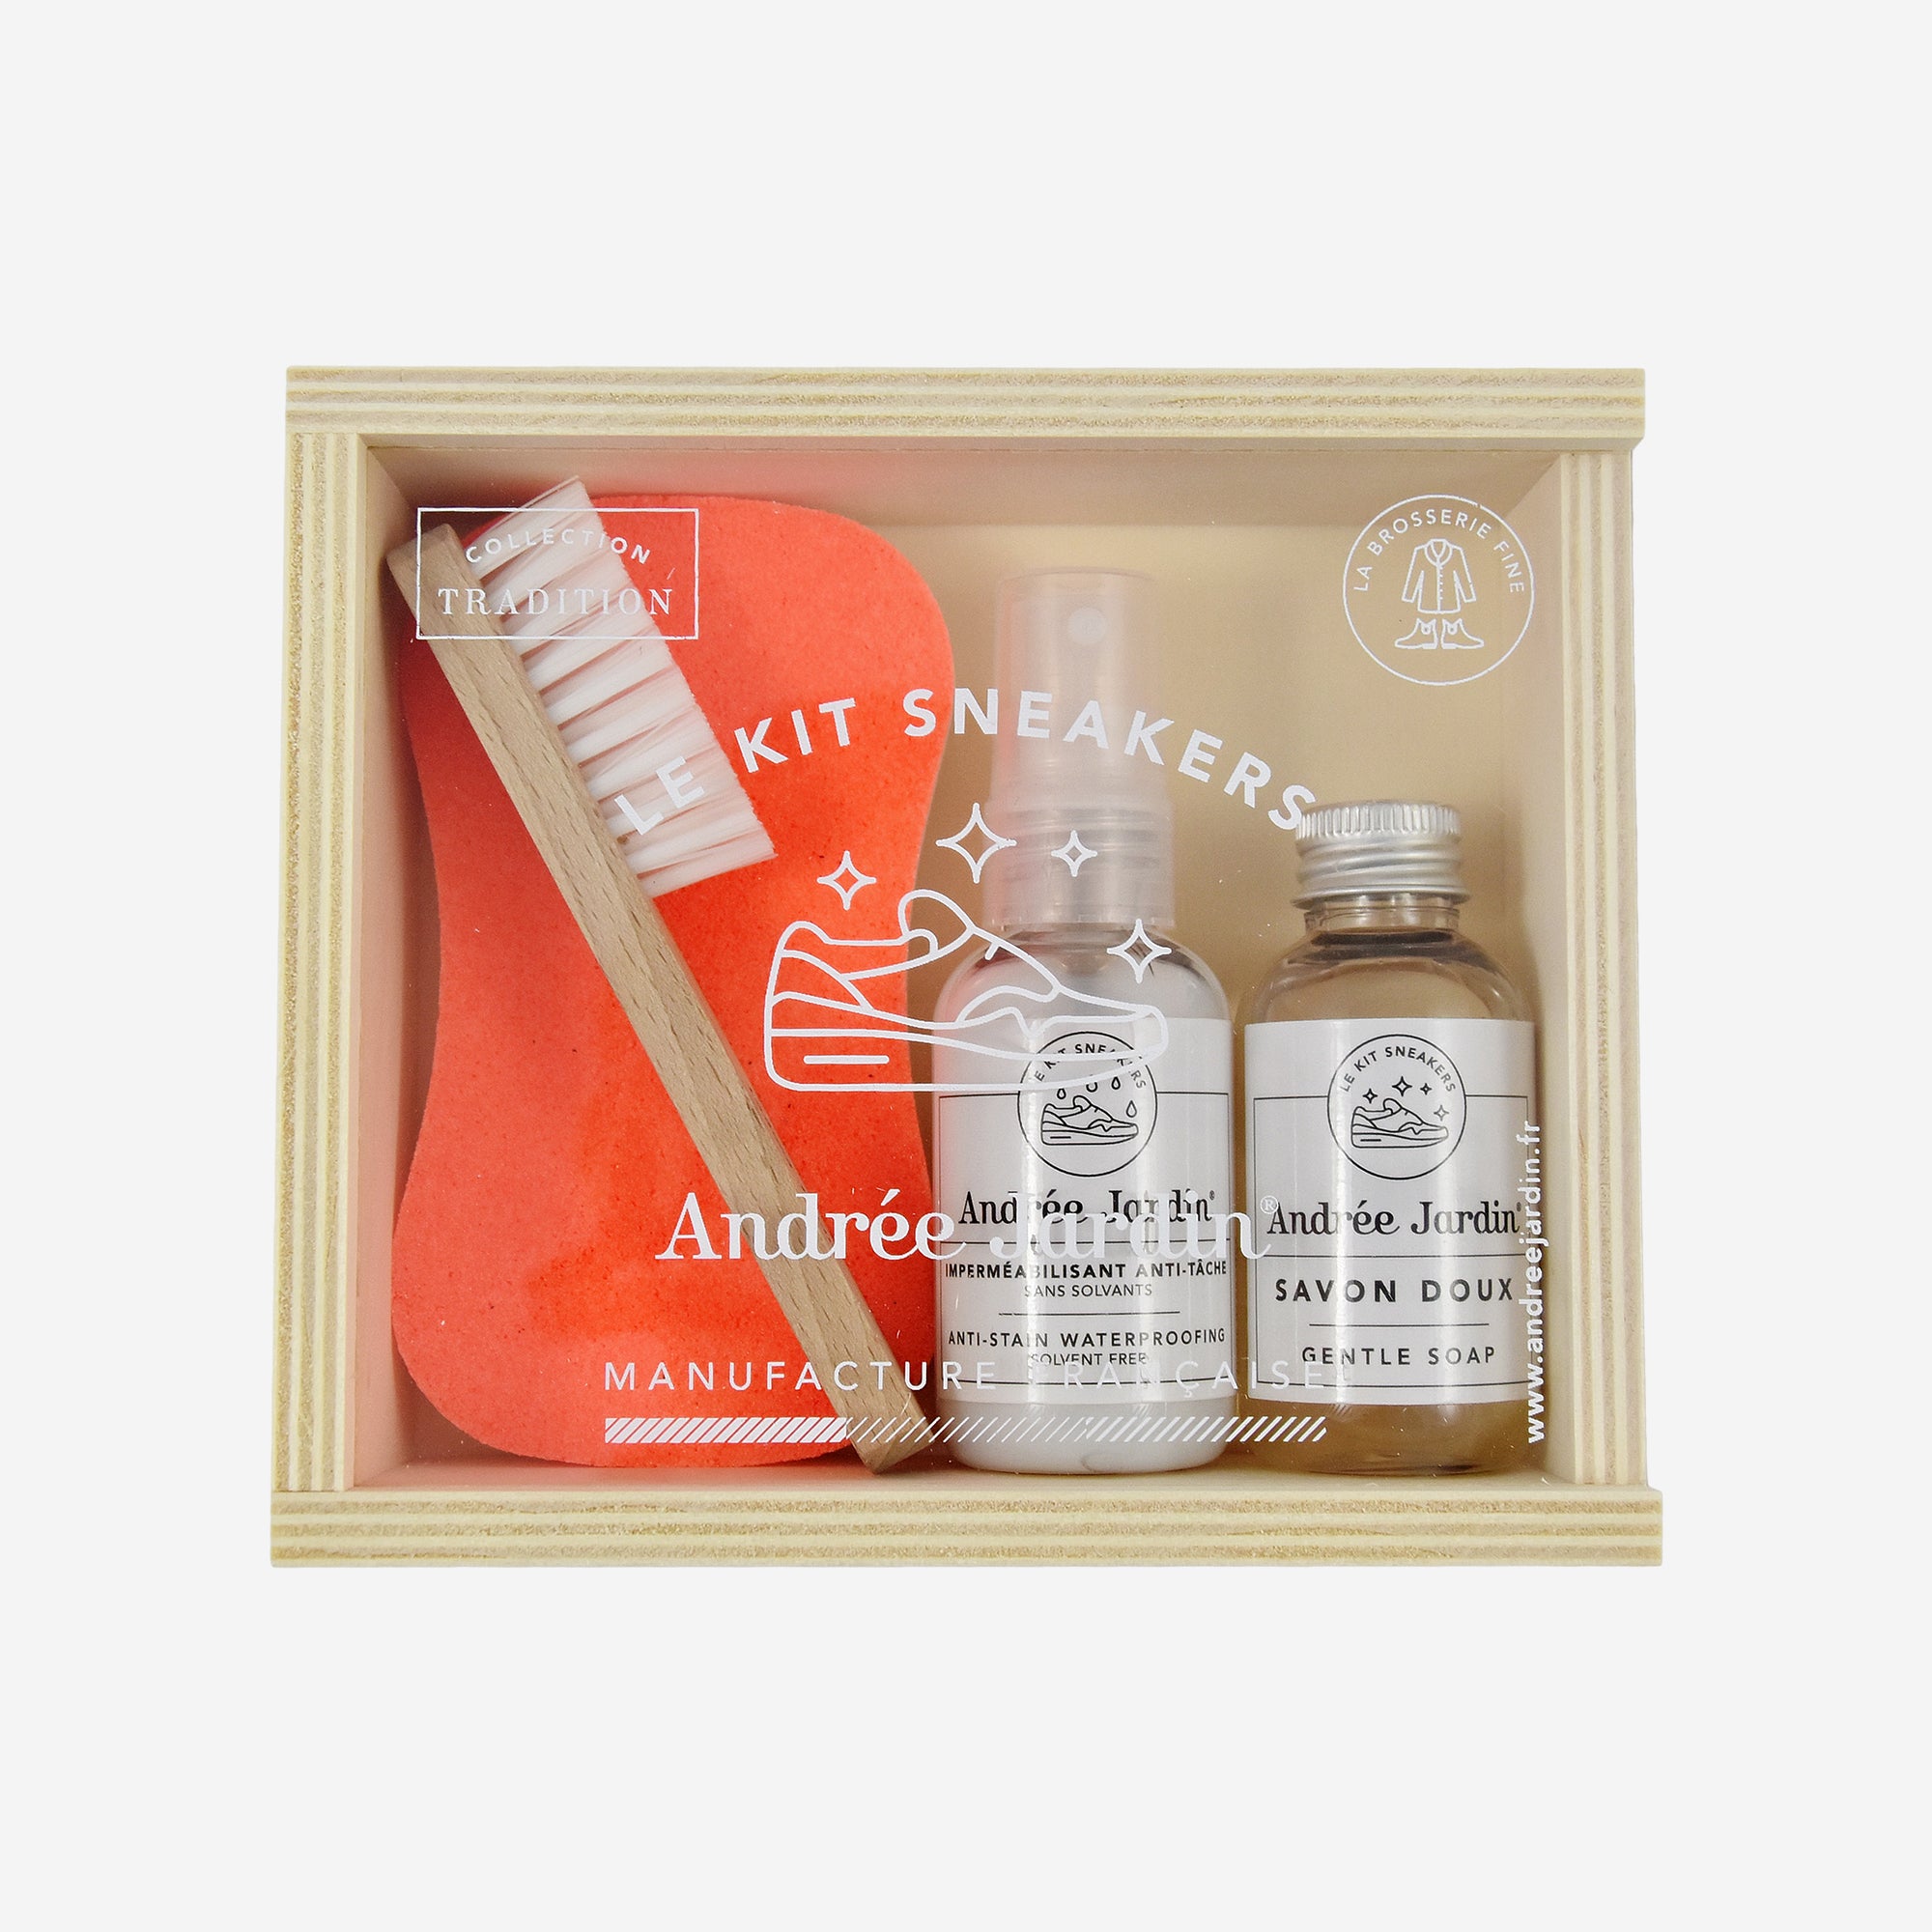 Sneaker trainer cleaning kit